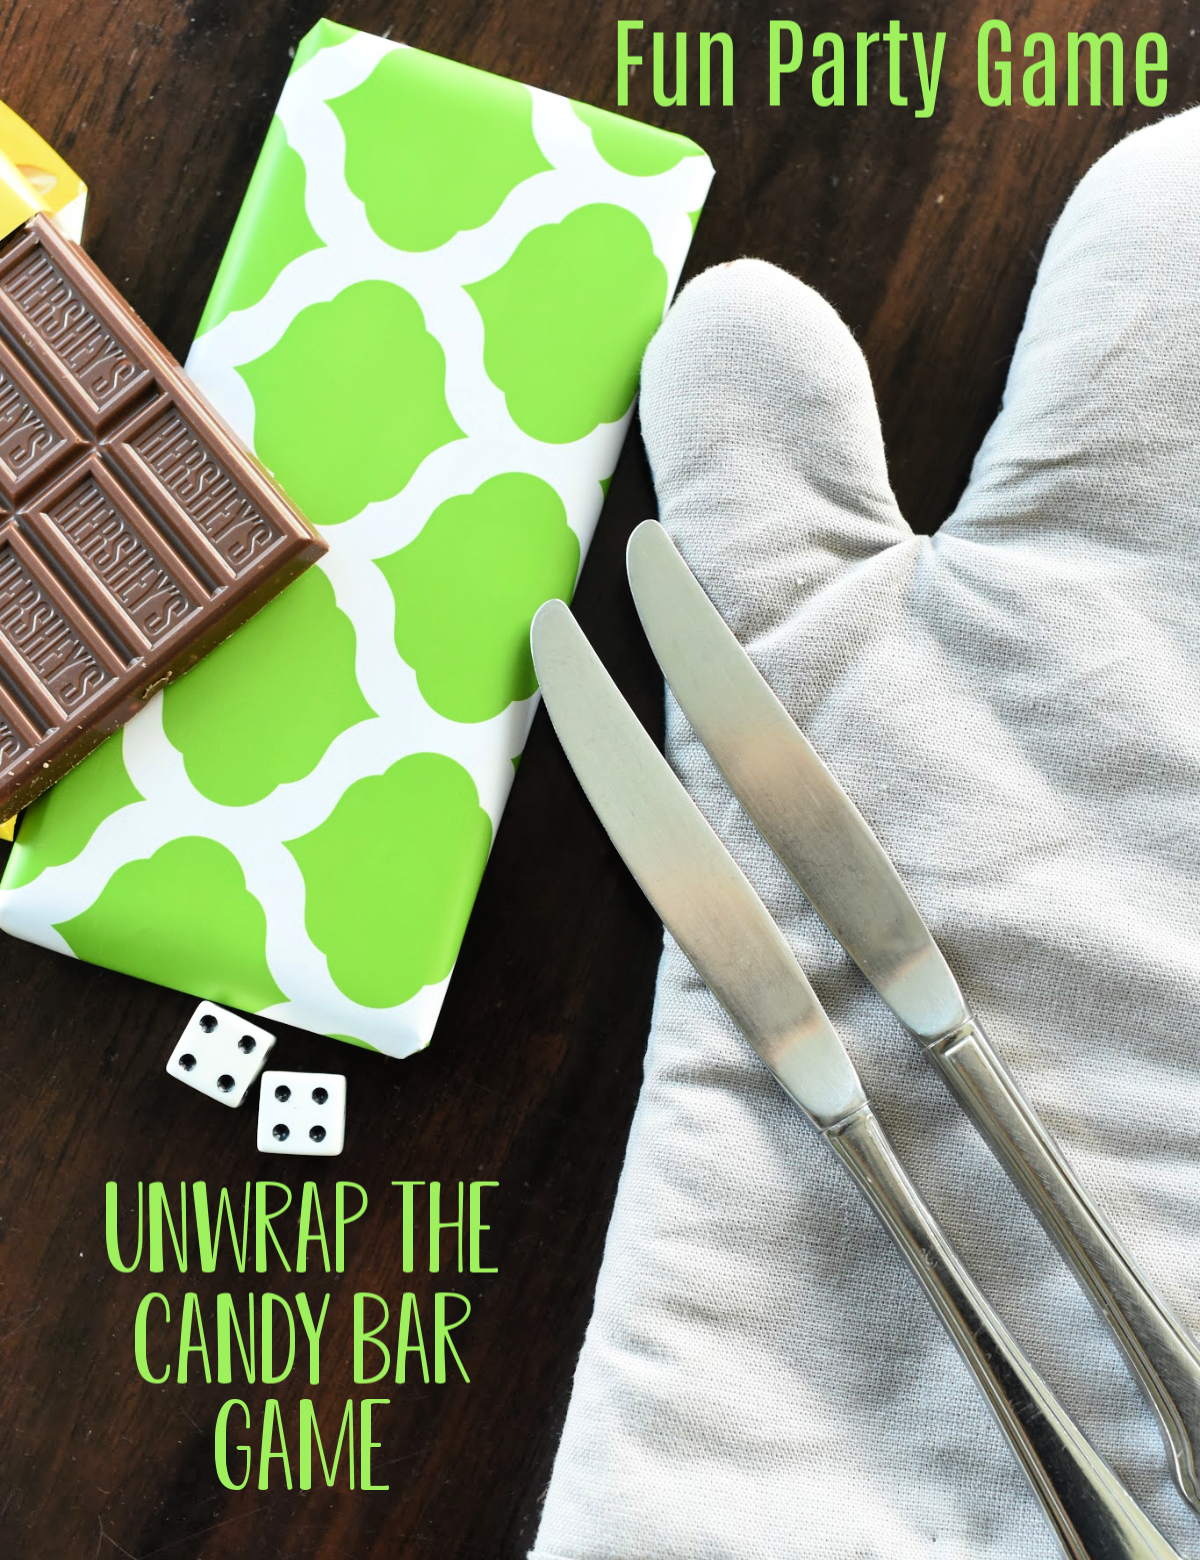 Unwrap the Candy Bar Game-This fun party game will be a hit for birthdays or other gatherings and it's super easy to put together! #partygames #games #birthdaygames #candybargame